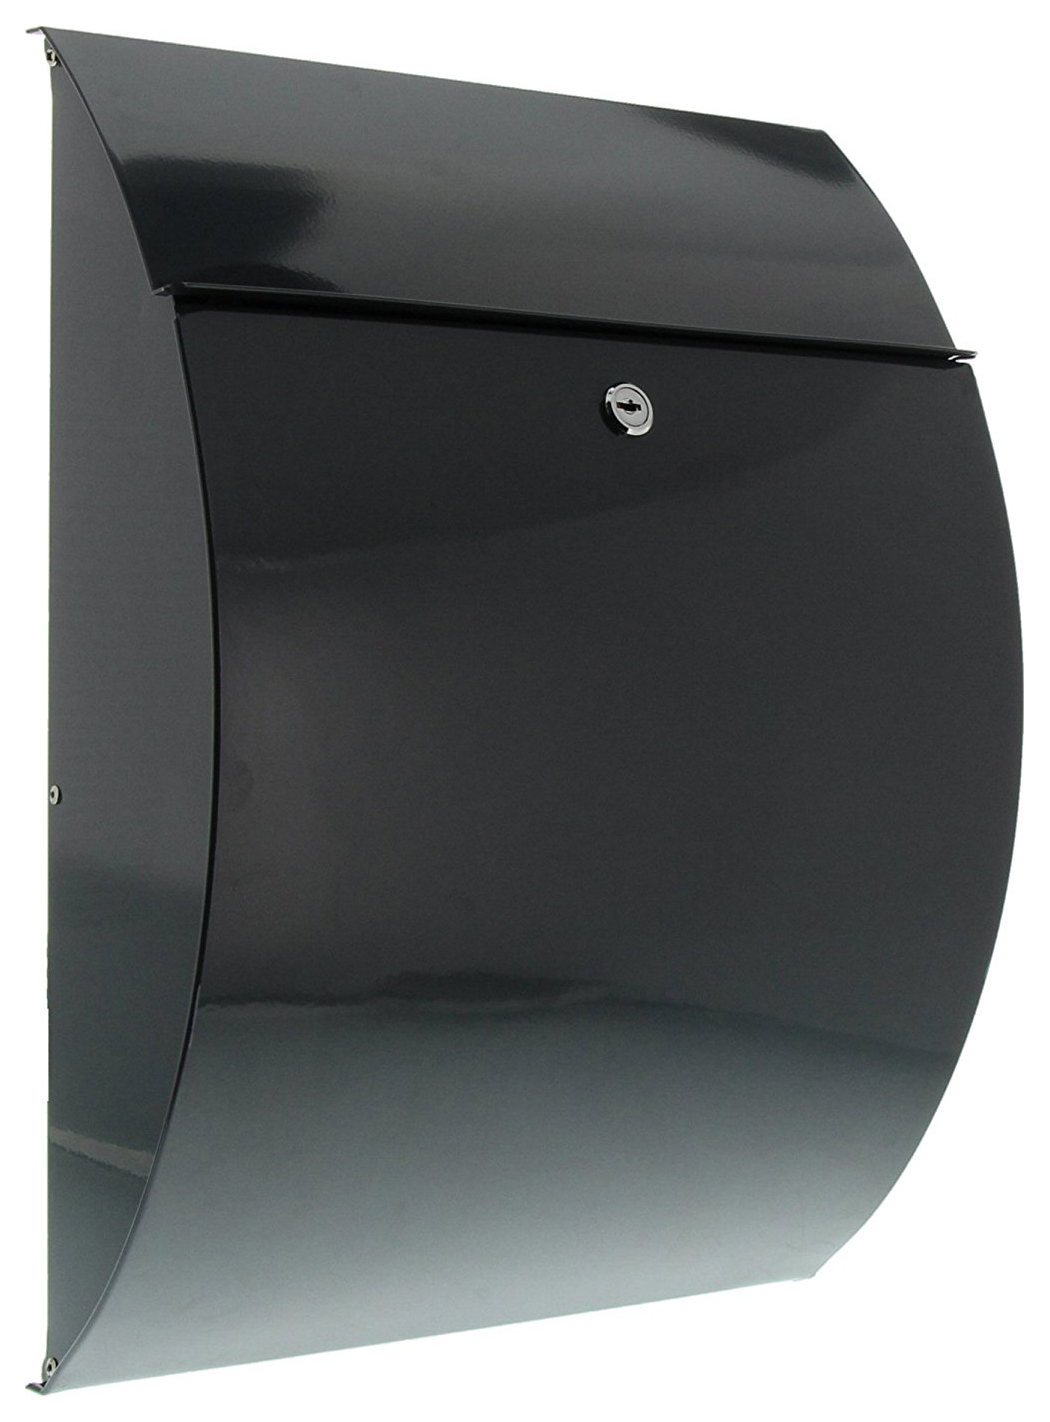 Burg-Wachter Anthracite Grey Riviera Wall Mounted Postbox - 460 x 335 x 130mm